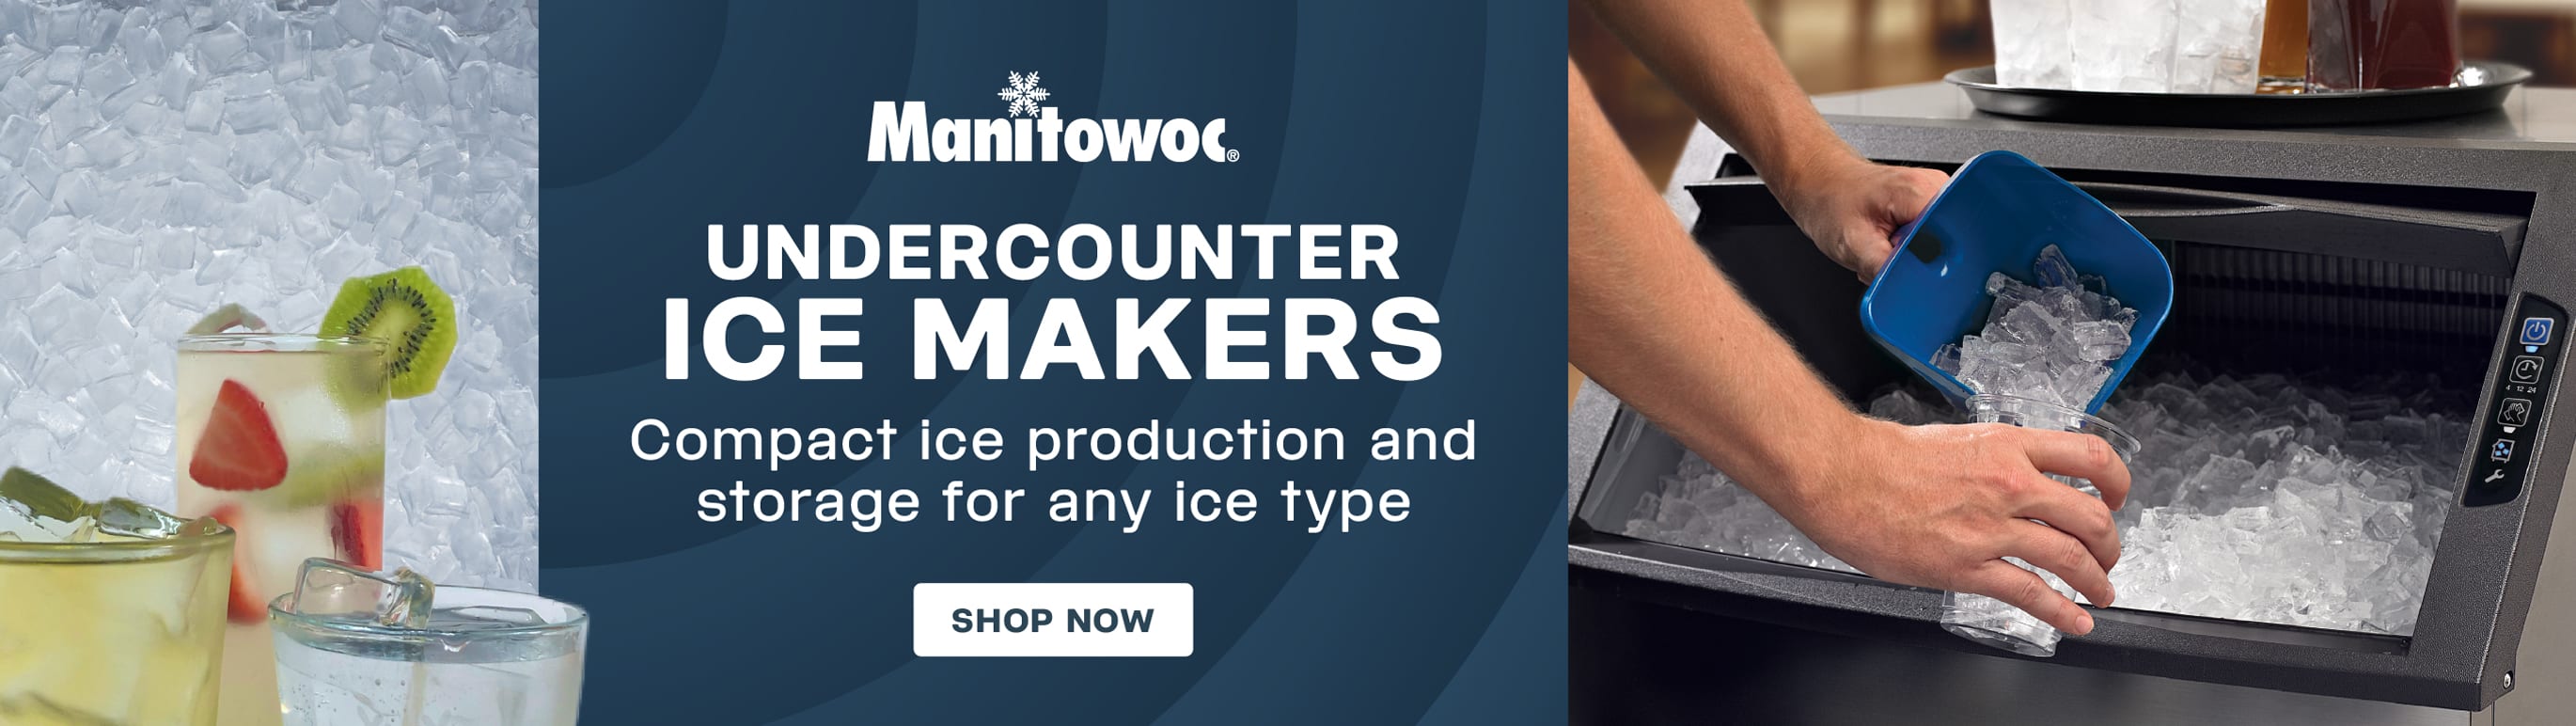 Manitowoc Undercounter Ice Makers